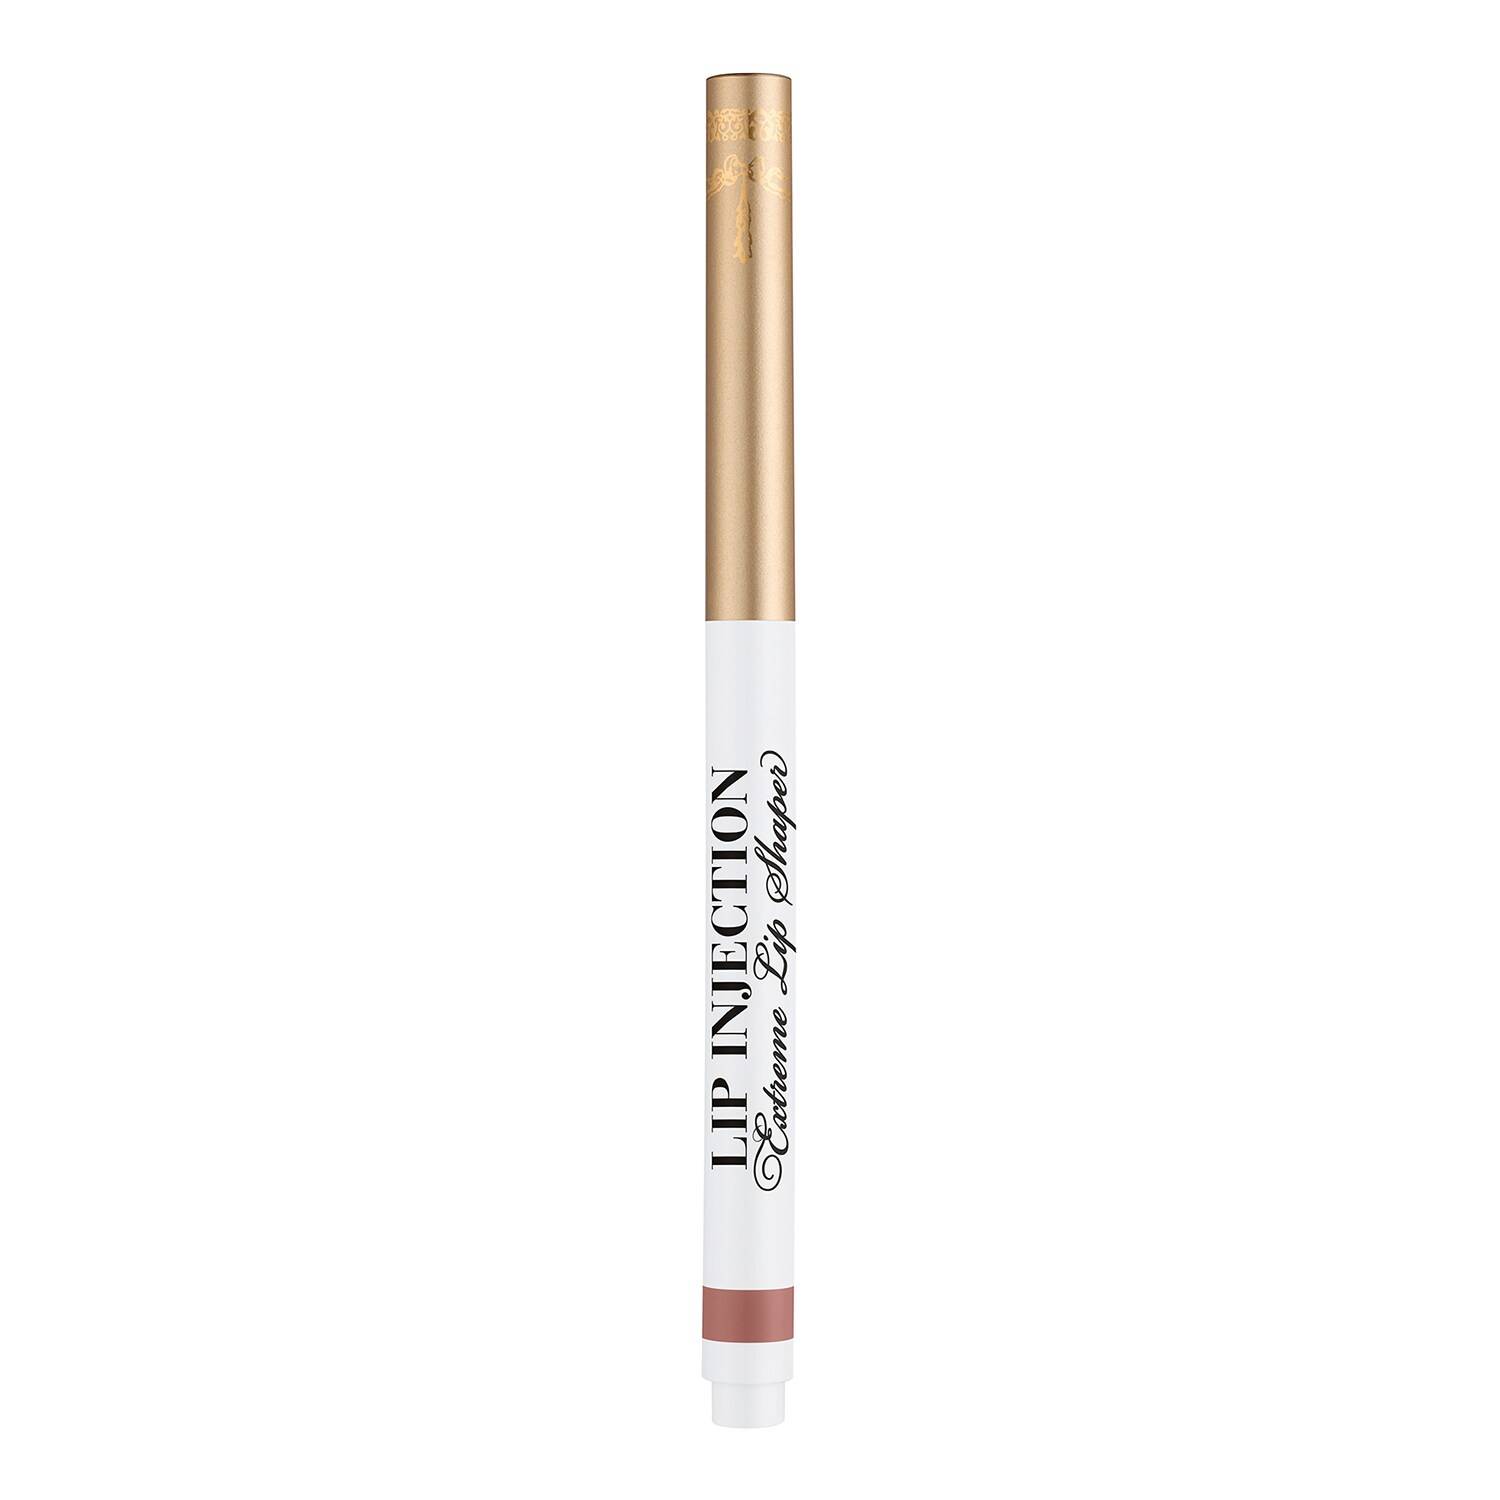 Too Faced Lip Injection Extreme Lip Shaper 0.38G Puffy Nude (0.28G)